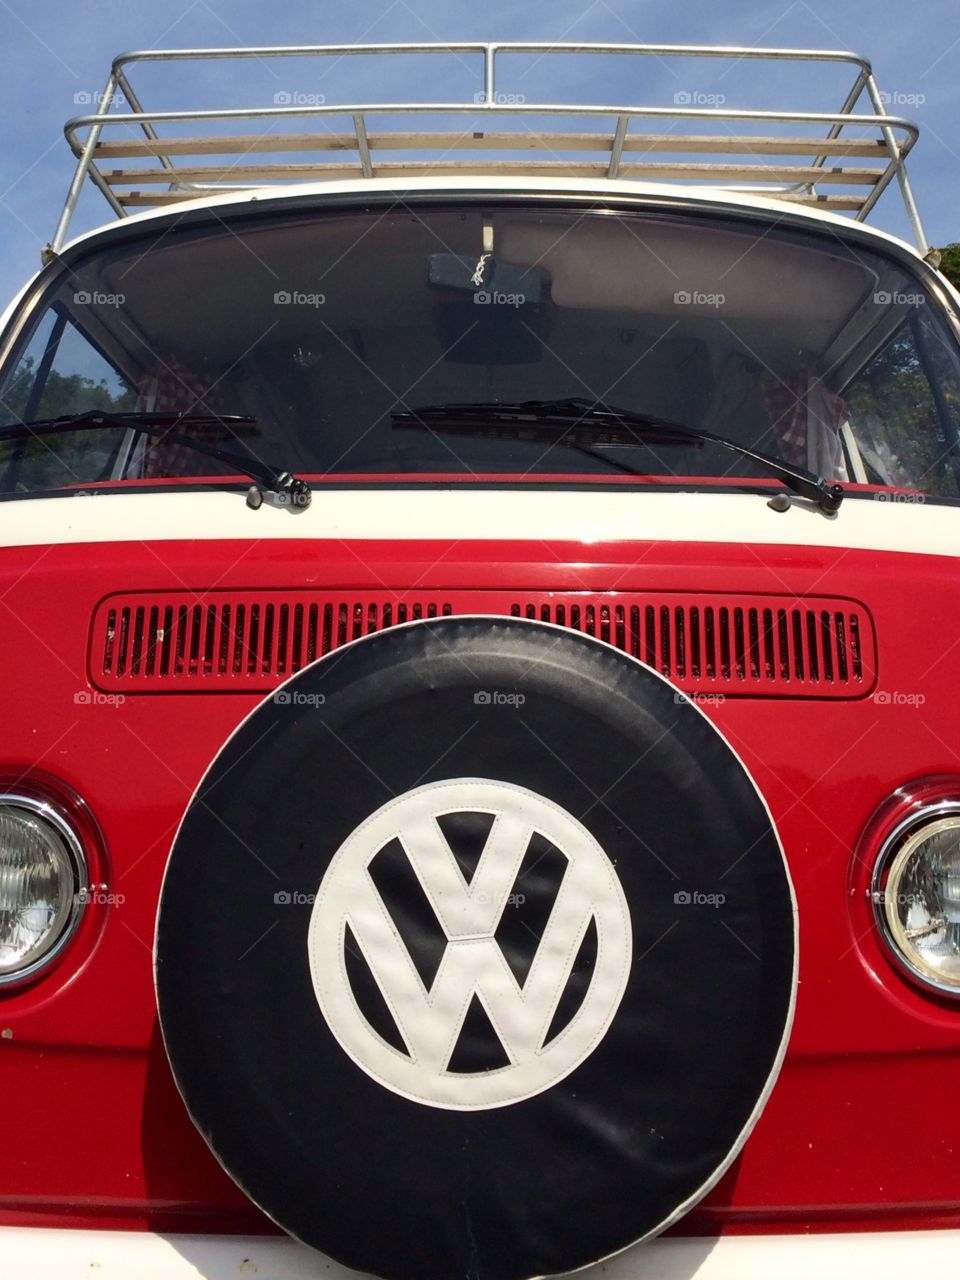 Red VW Van. My favourite one. What a colour!
